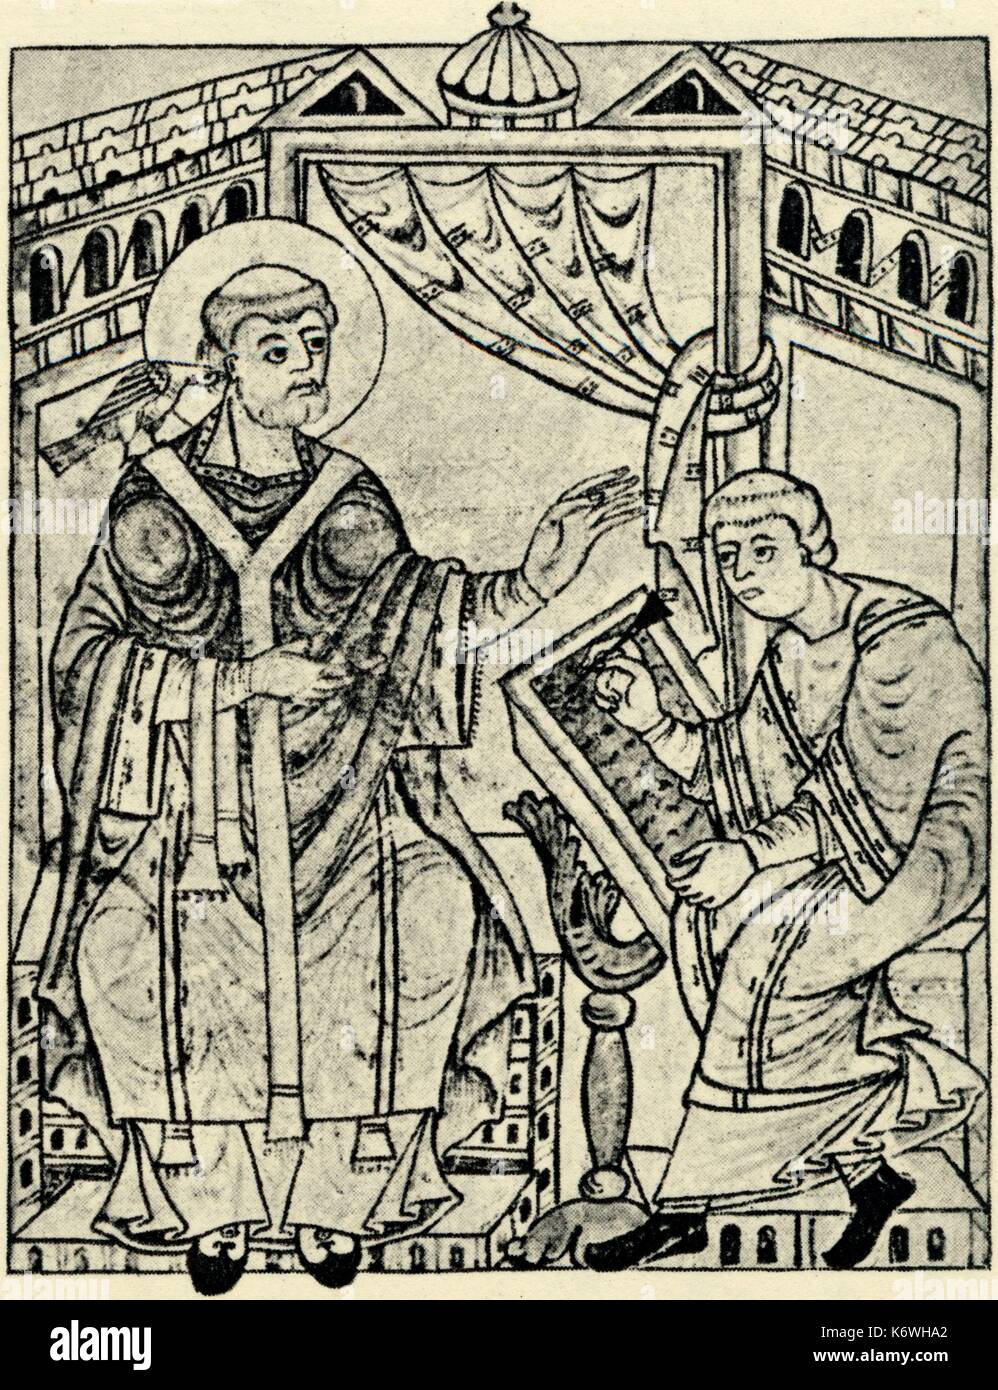 St Gregory  ( Gregorian chant named after him )  dictating to Deacon Peter. Drawing from Hartker's Antinphonary, St Gall, late 10th century. c. 540 – 12 March 604 Stock Photo